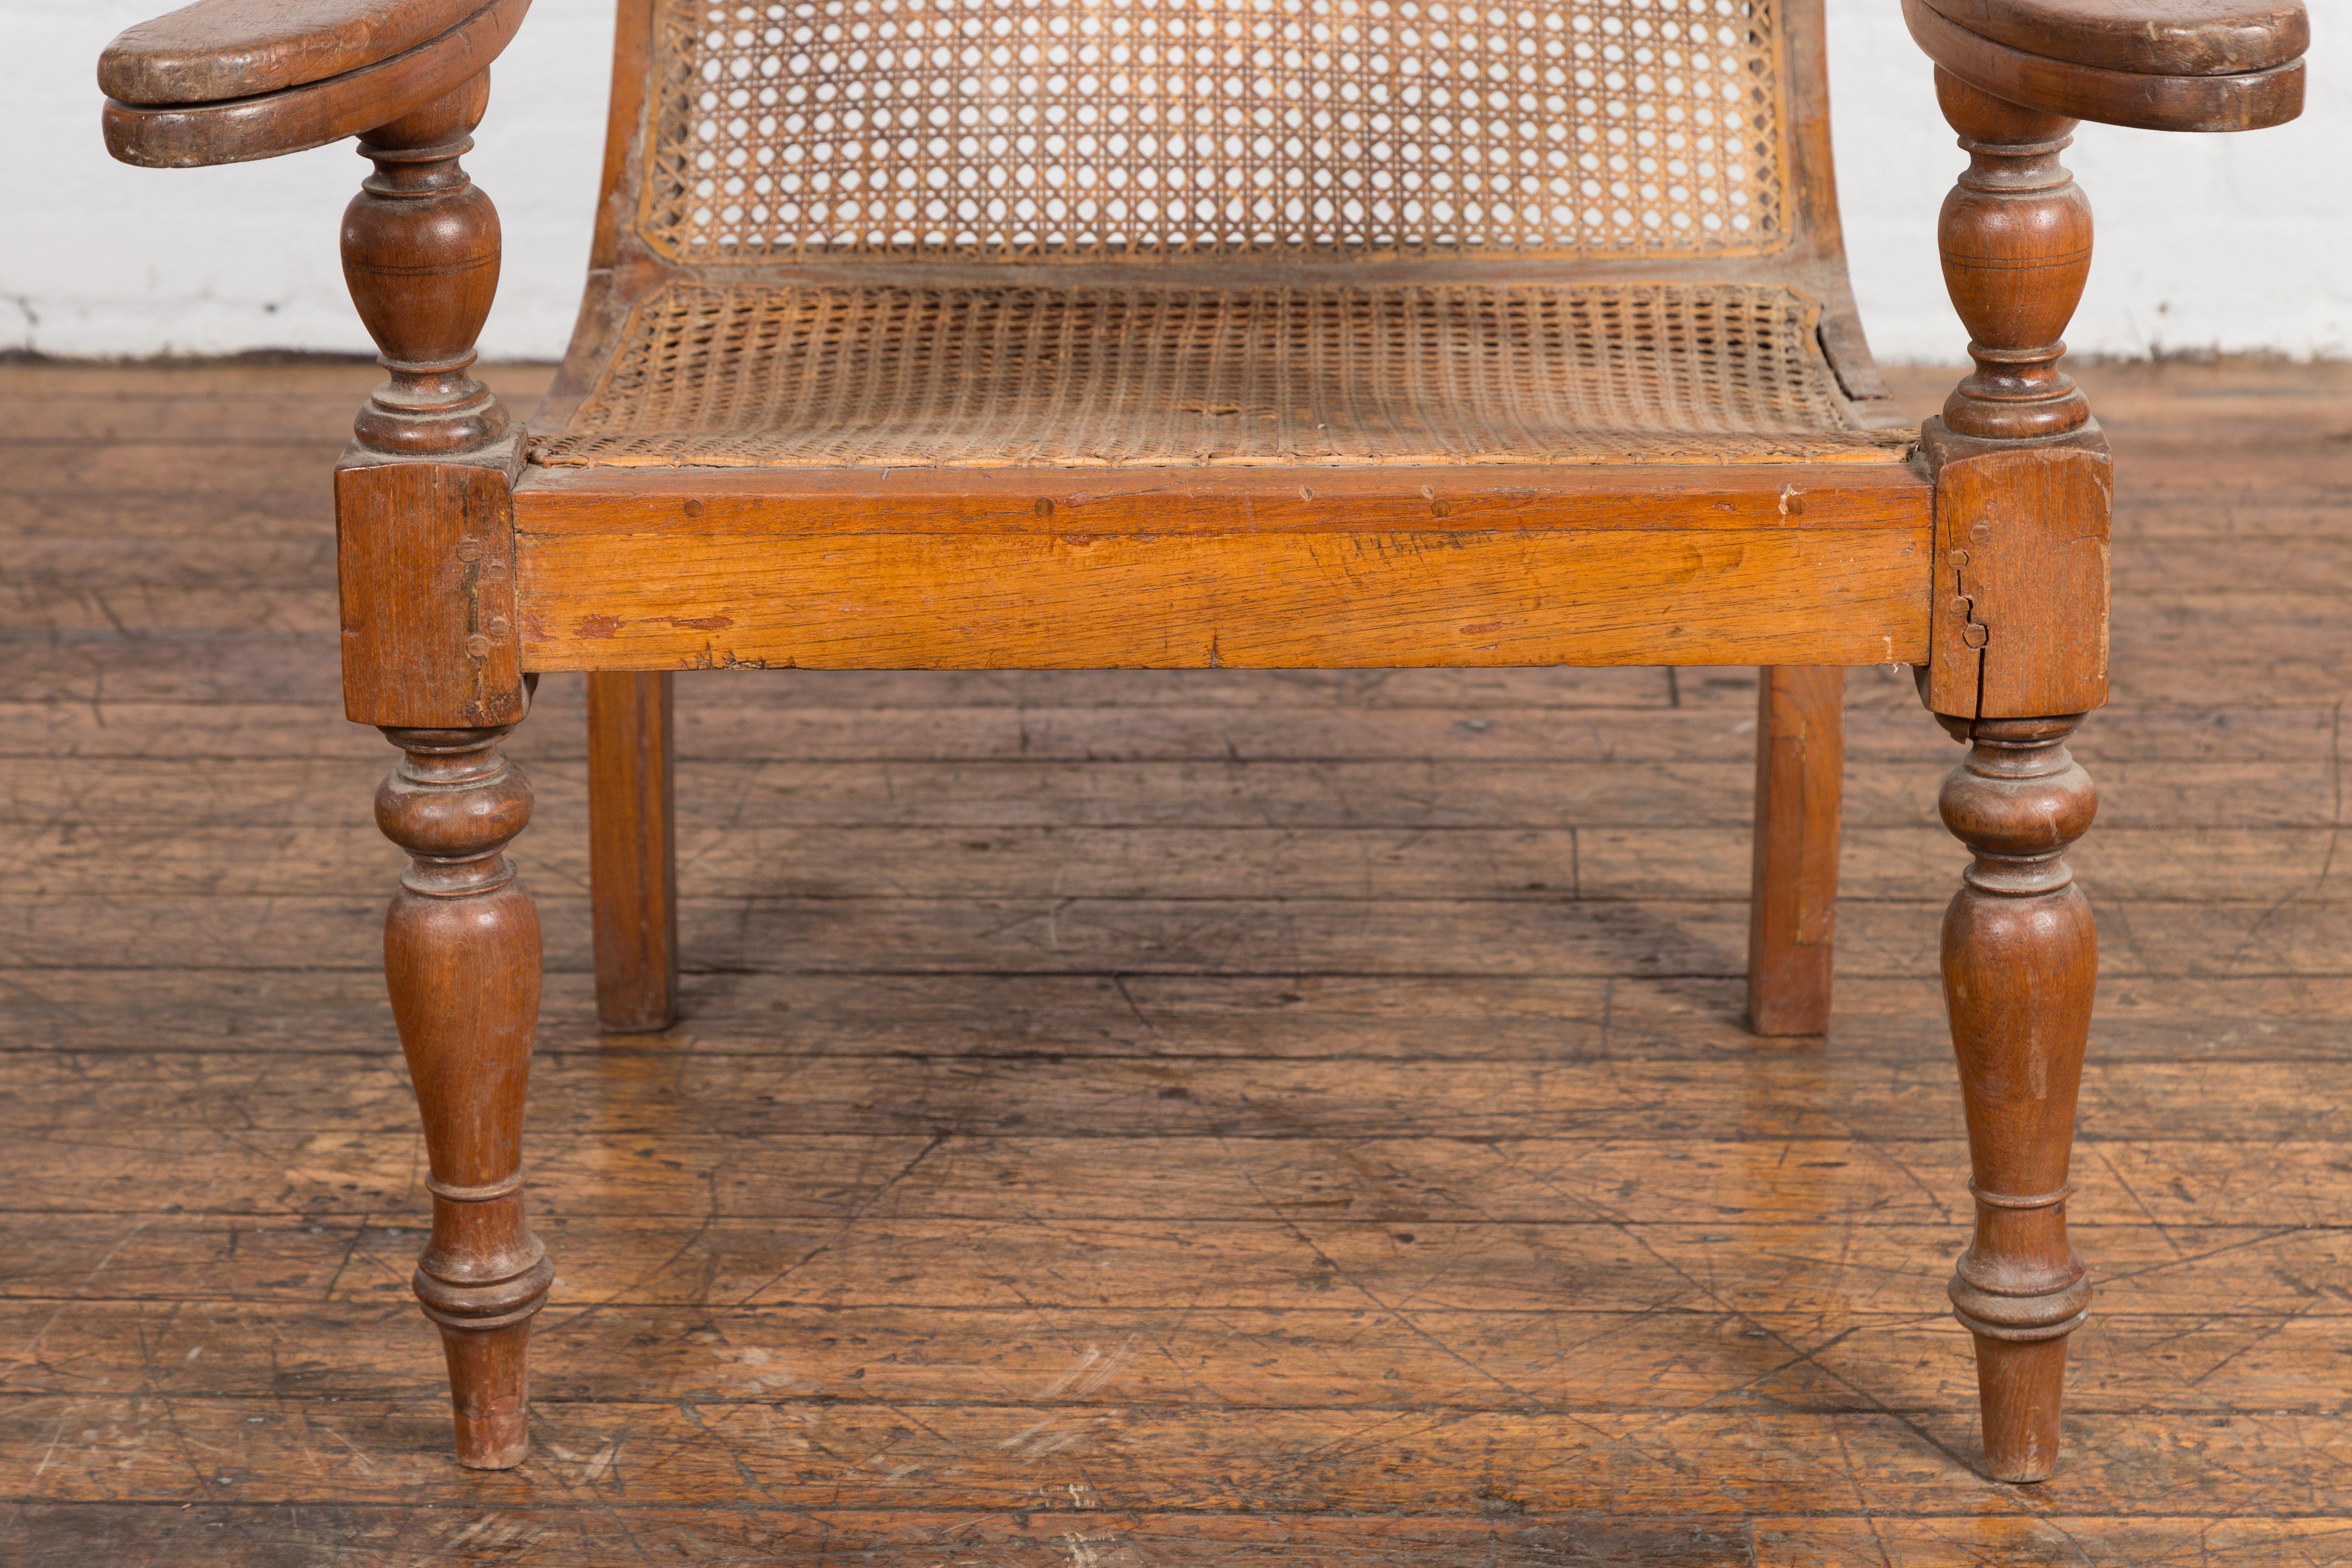 Dutch Colonial Indonesian Cane and Wood Plantation Chair with Extending Arms For Sale 1